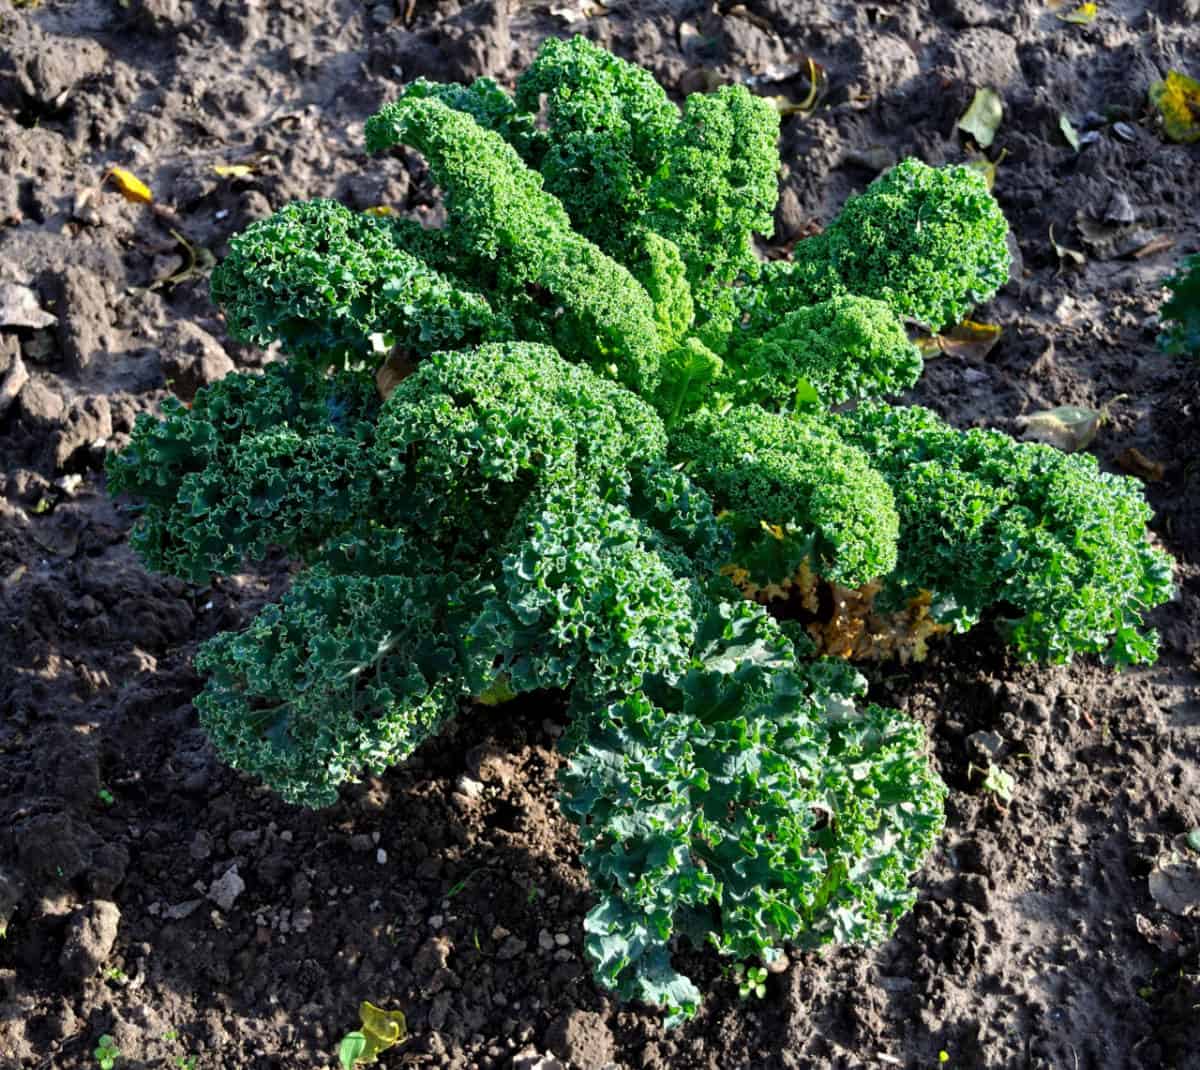 a mature kale plant in the garden ready for harvest